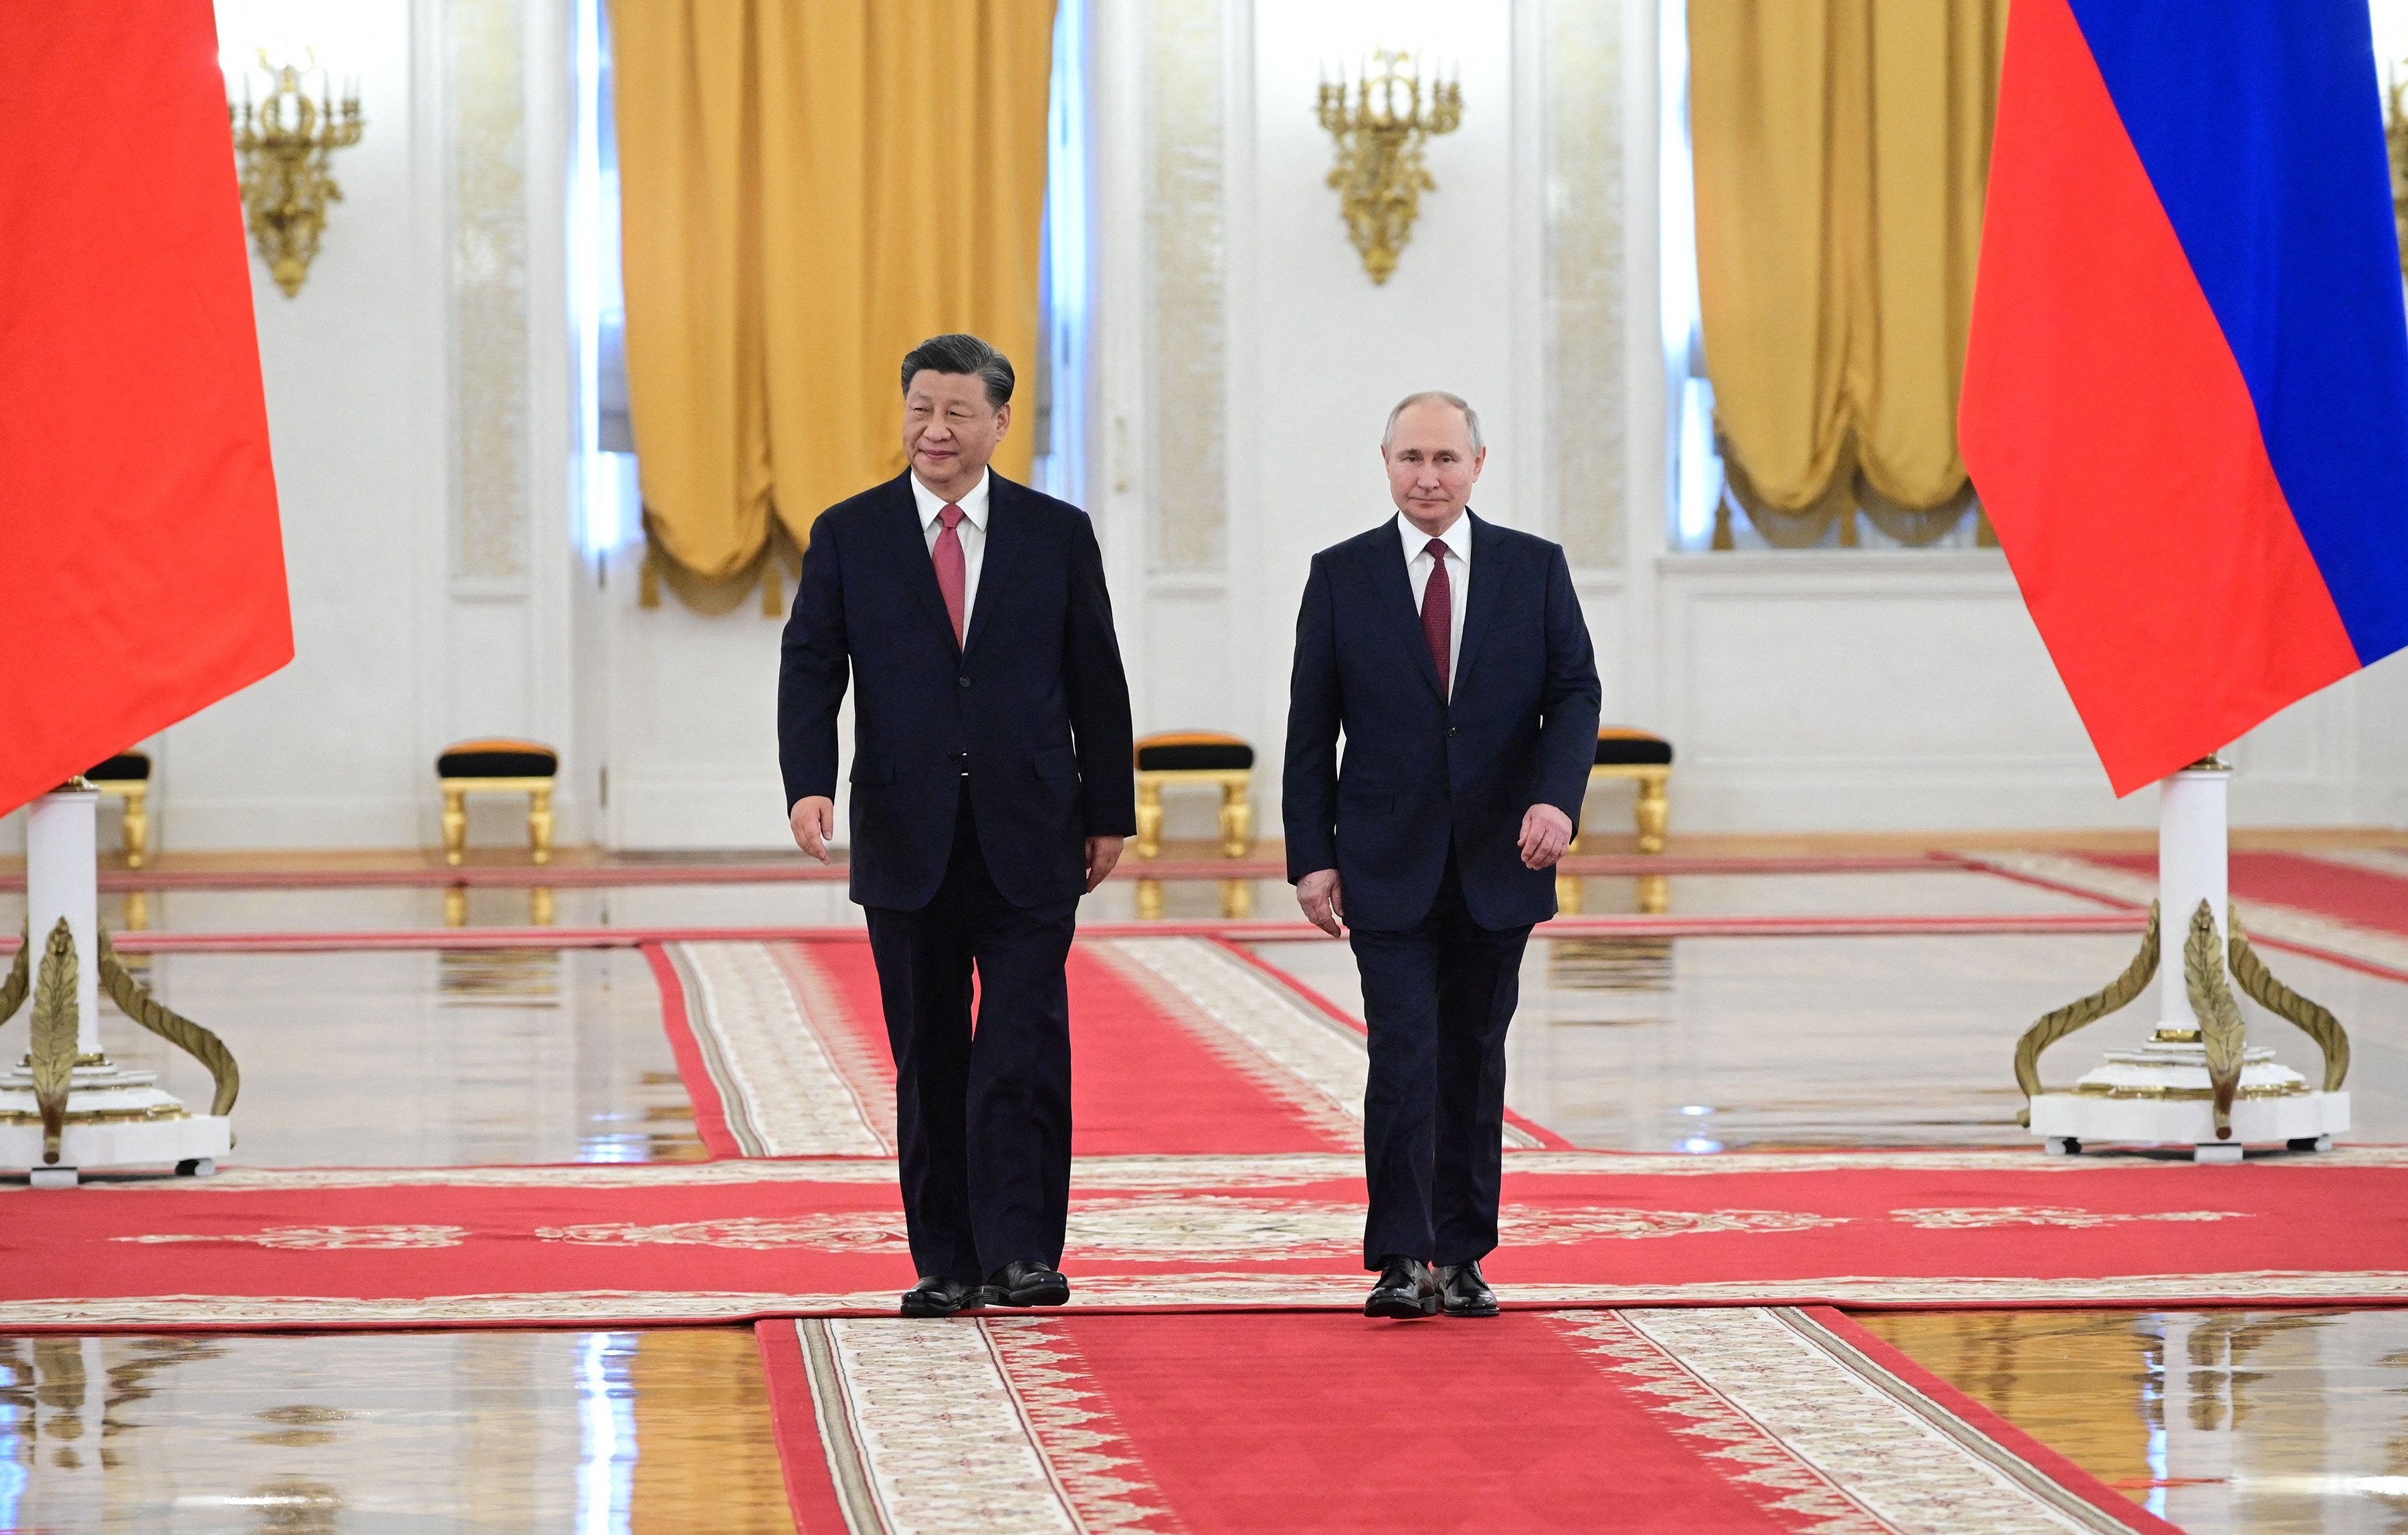 Presidents Xi Jinping and Vladimir Putin have agreed that China and Russia are driving changes not seen in a century. Photo: TNS